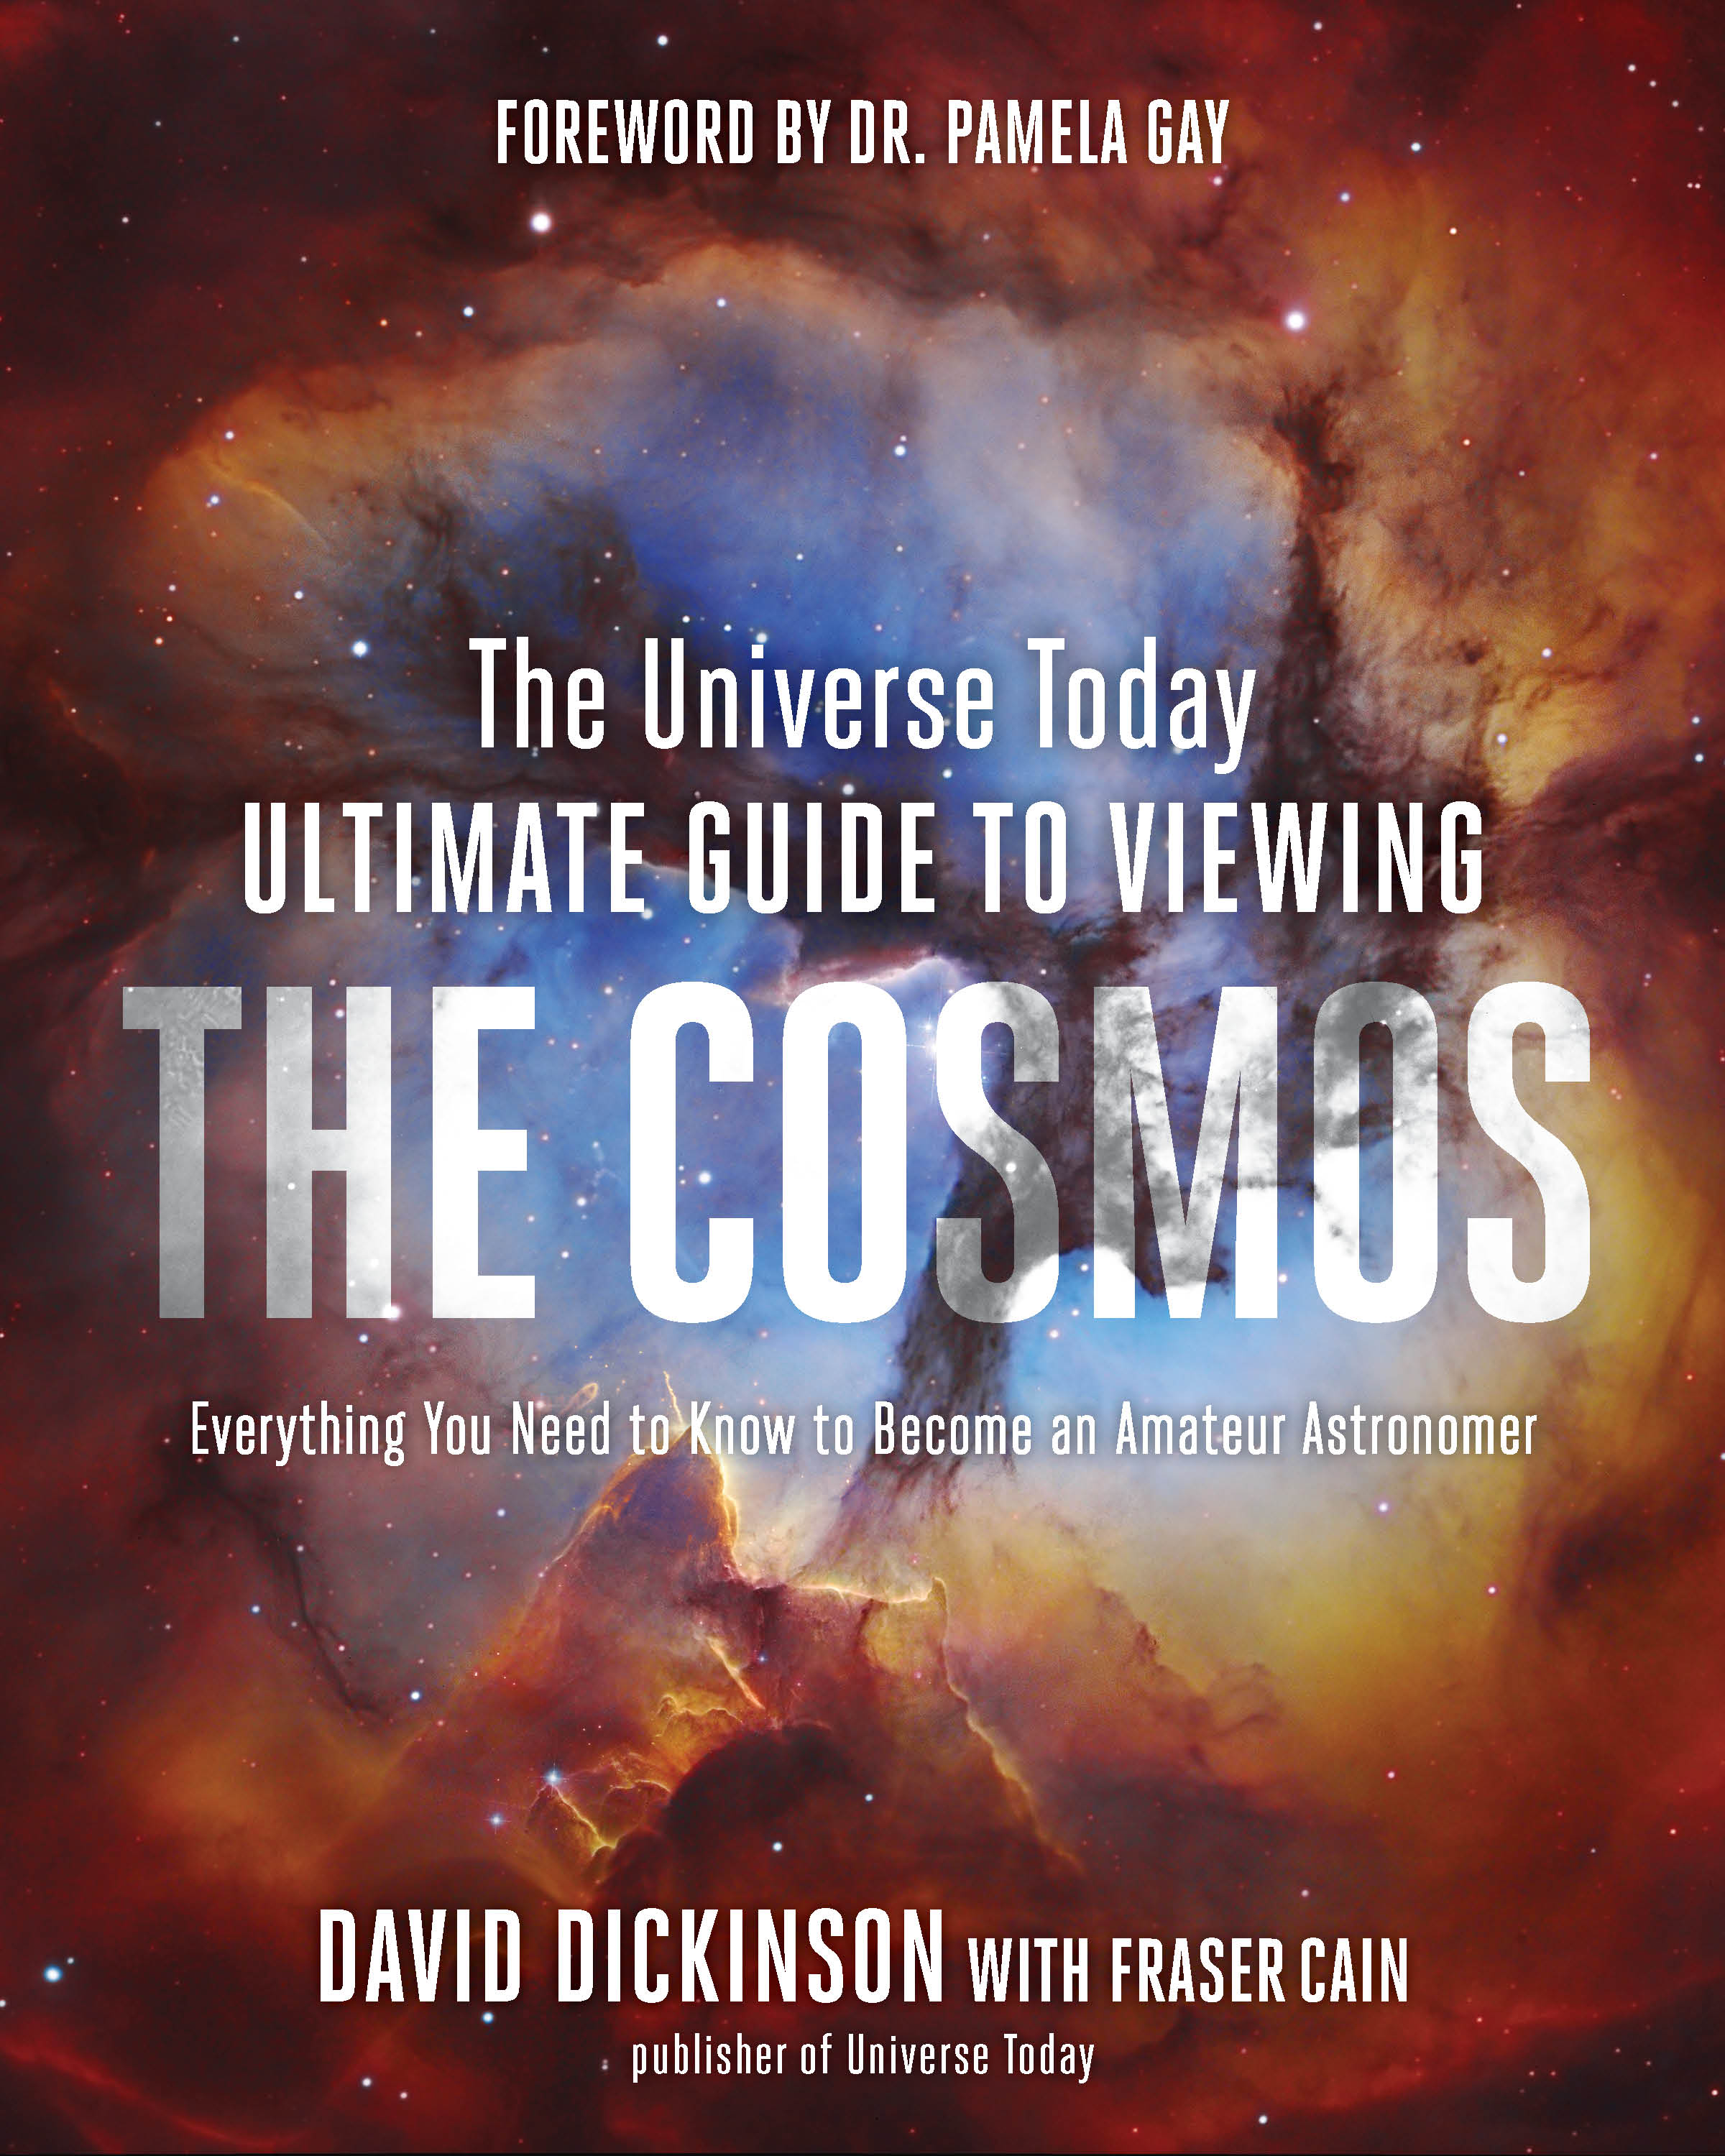 The Universe Today Ultimate Guide to Viewing the Cosmos by David Dickinson with Fraser Cain